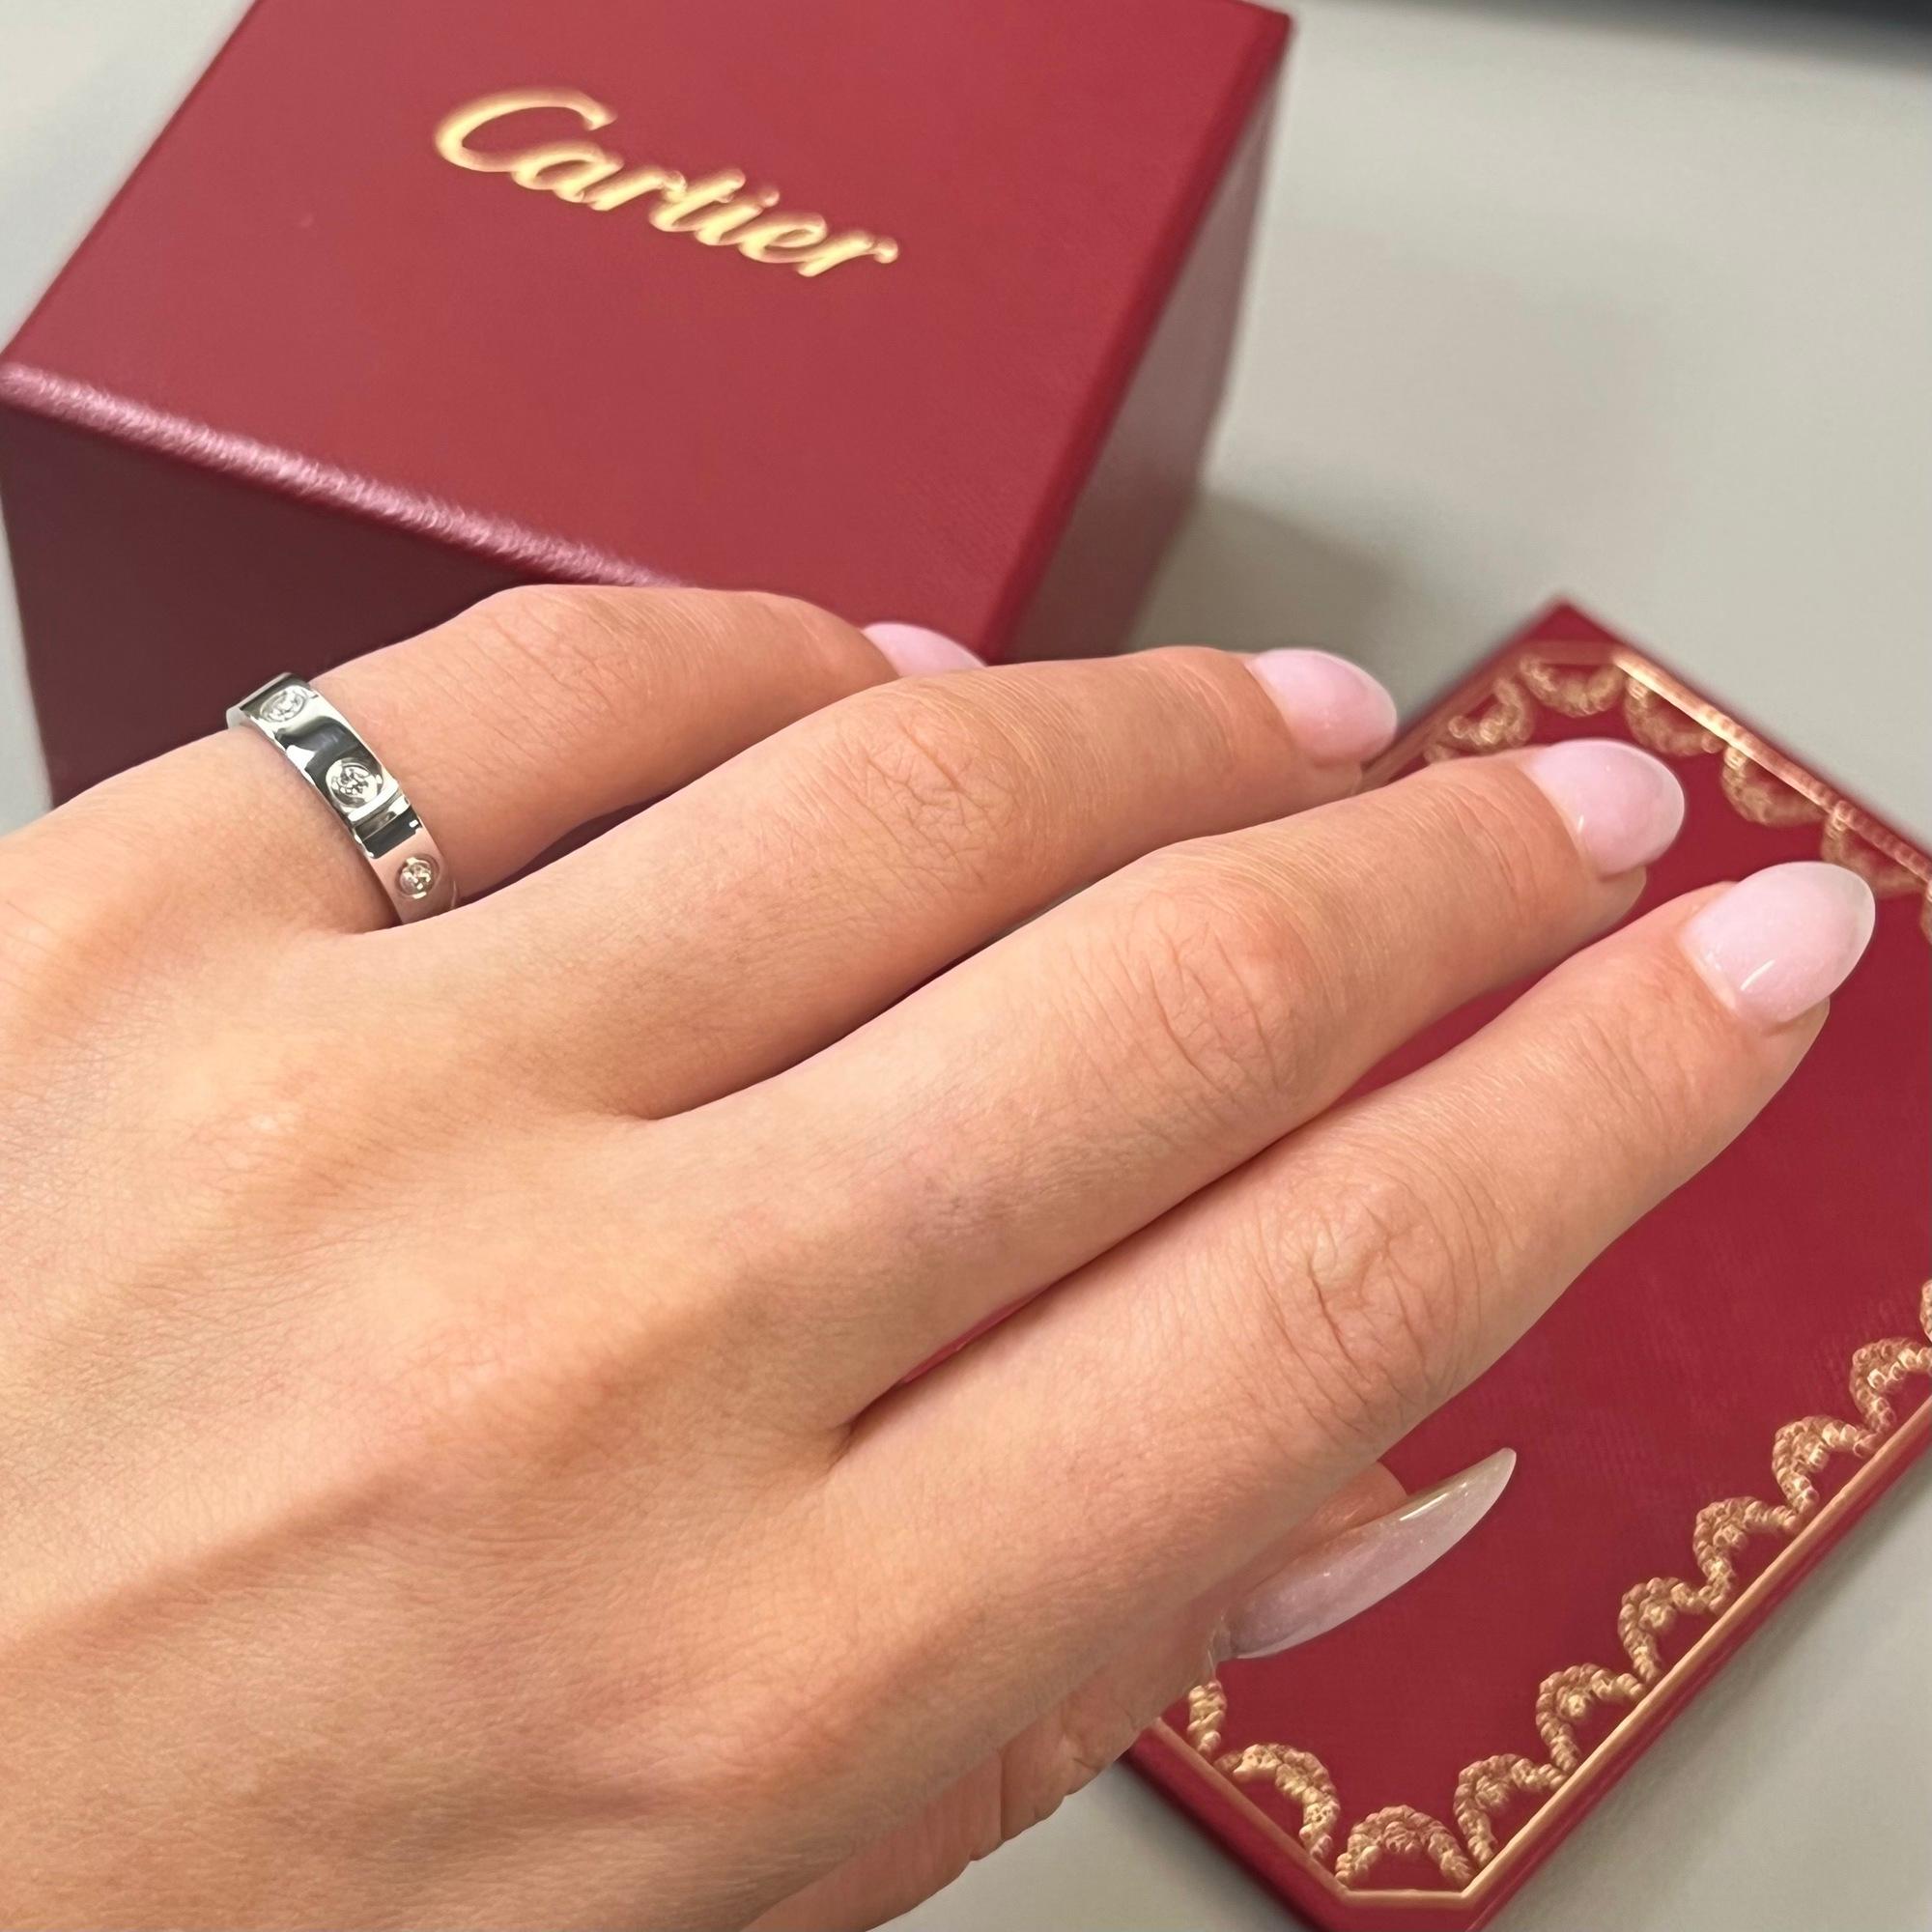 cartier ring size 48